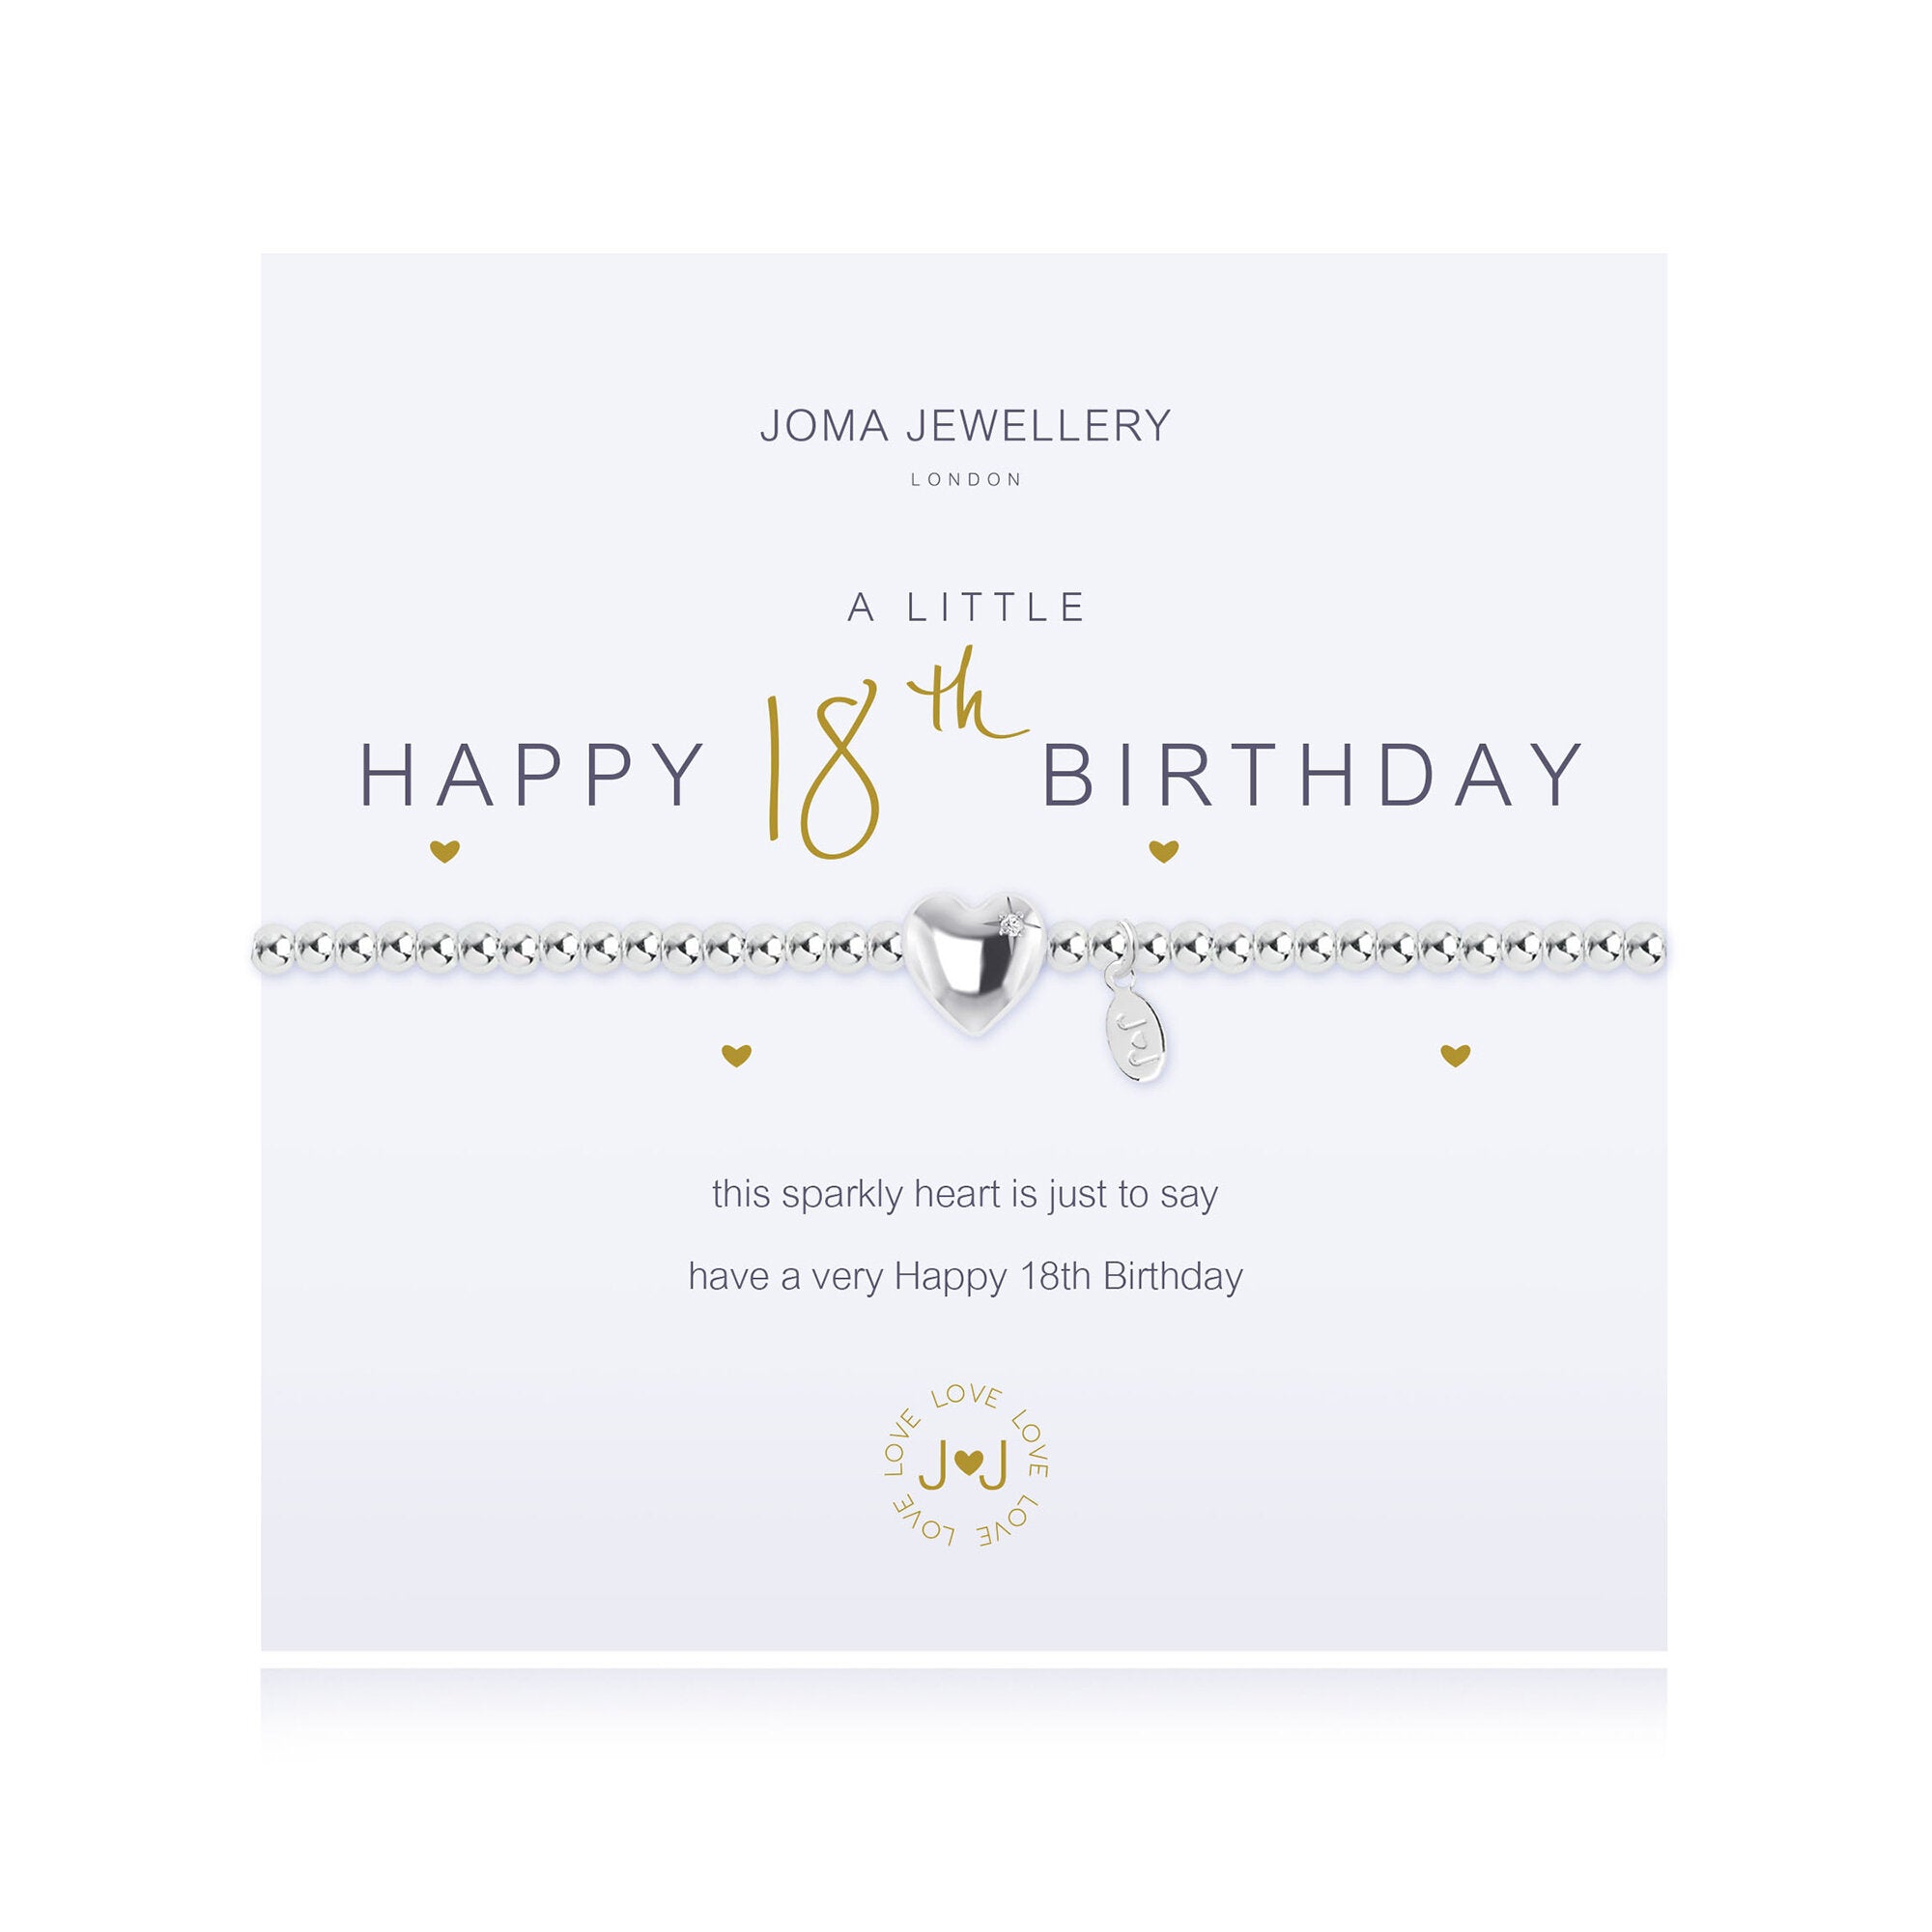 A little happy 18th - Joma Jewellery